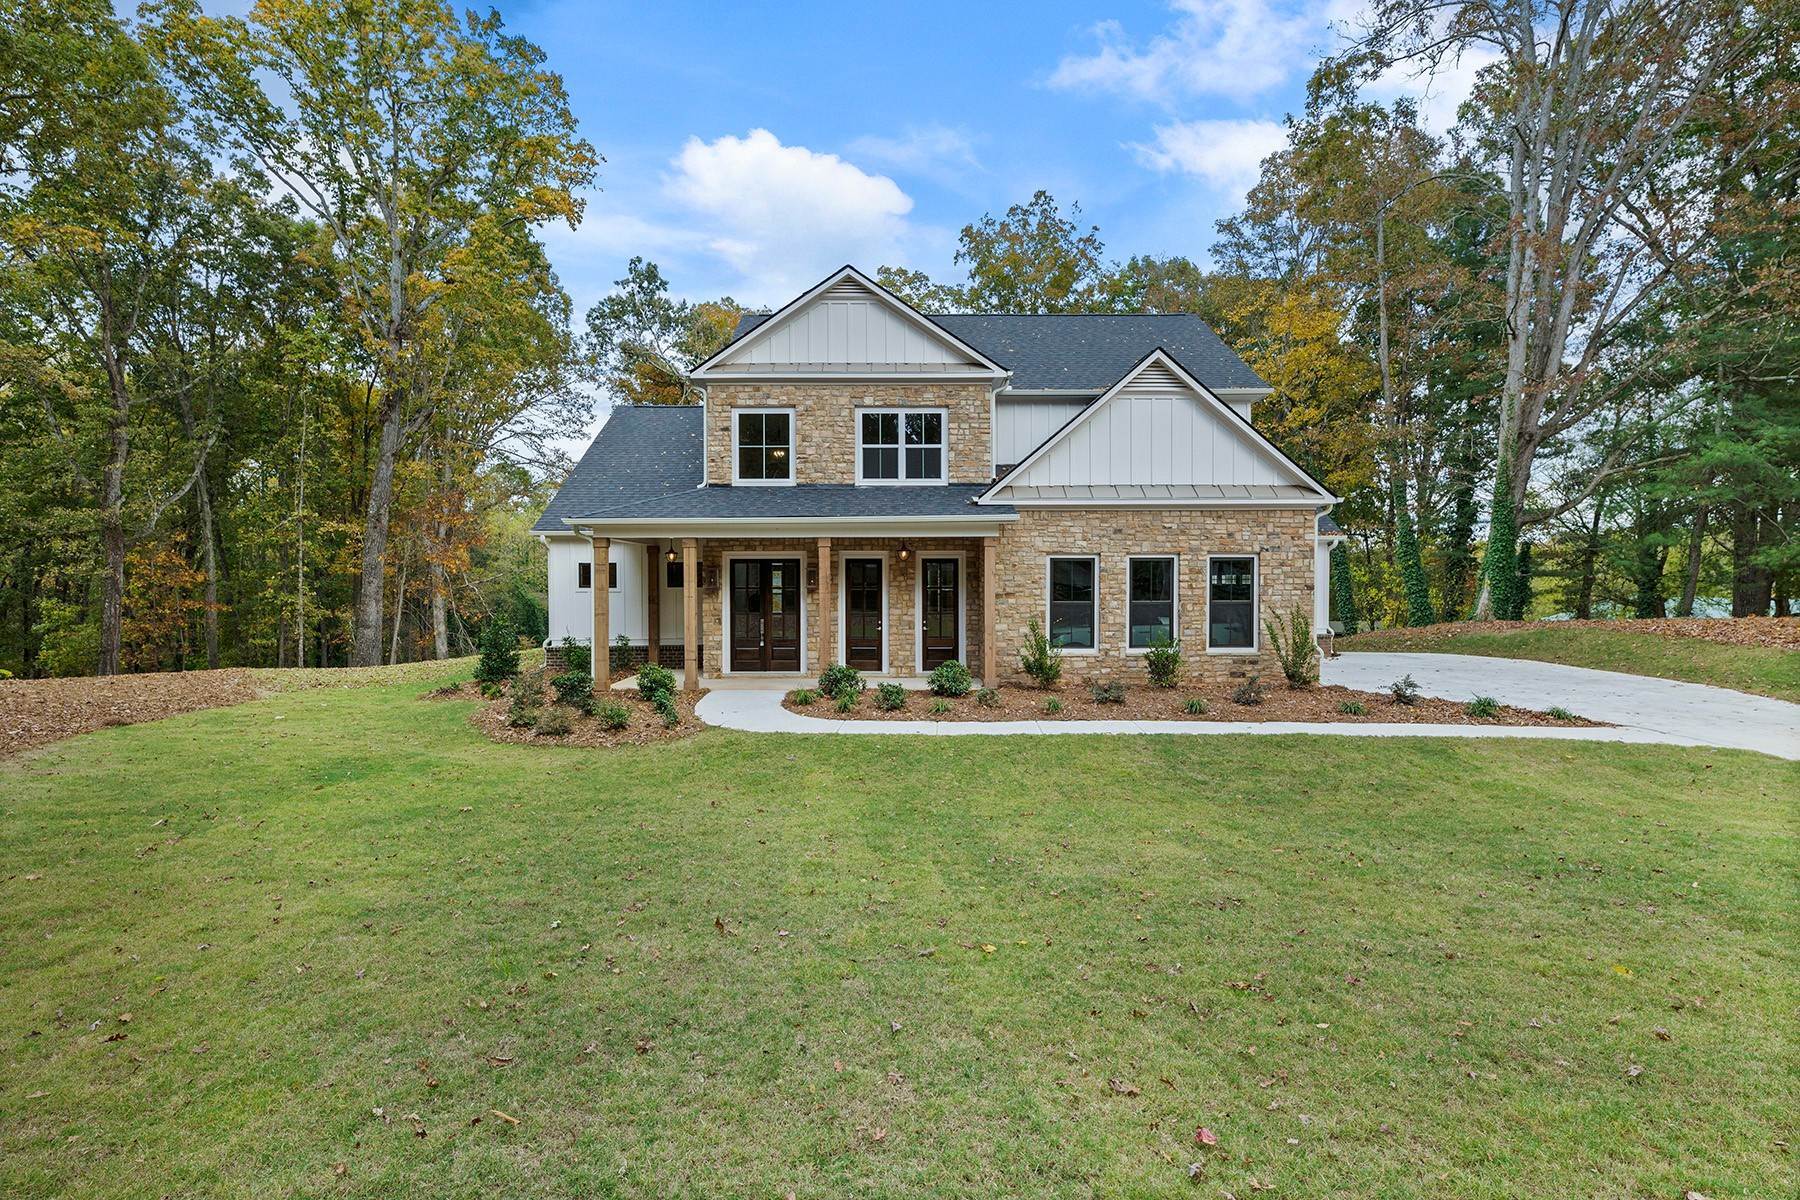 Single Family Homes for Sale at Newly Completed Craftsman on One Acre in Milton's Top School District 12905 New Providence Road Milton, Georgia 30004 United States